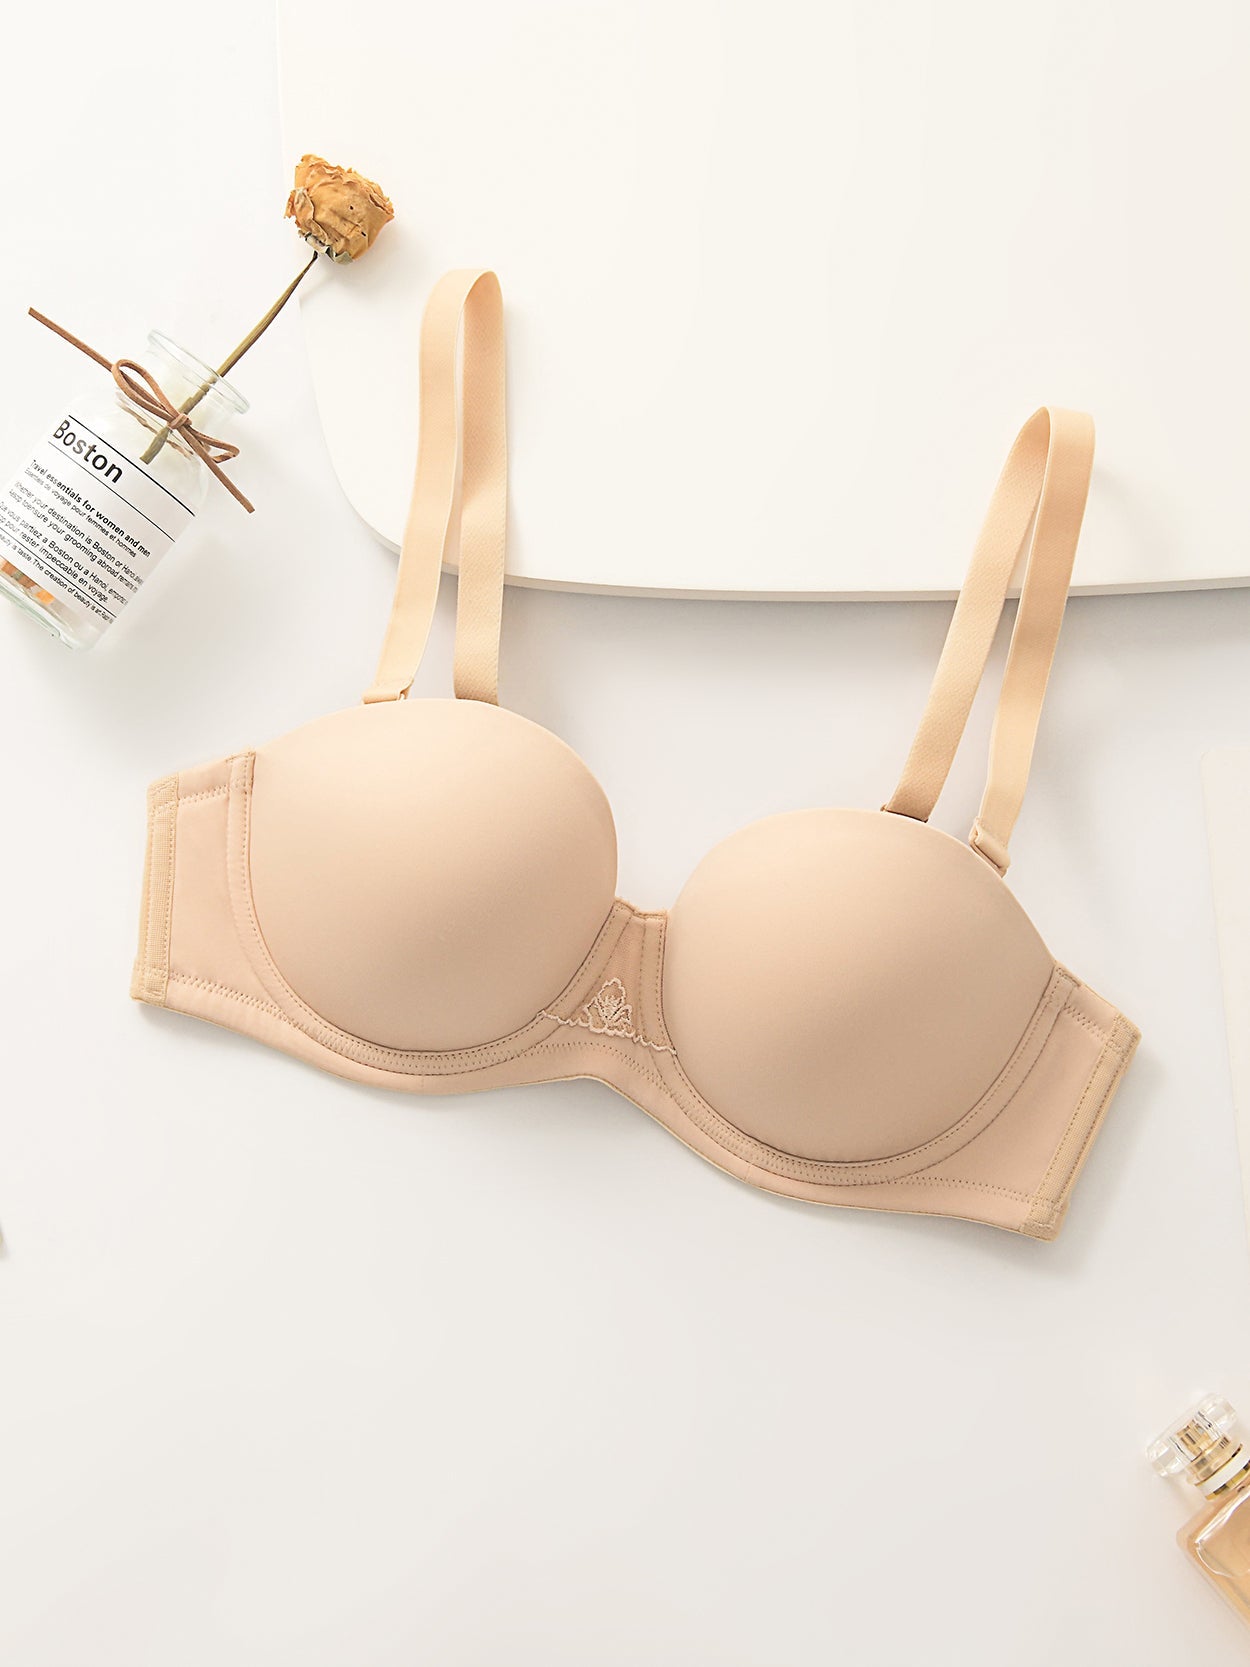 Contour Bras vs. Push-Up Bras: Do YOU Know Which One You're